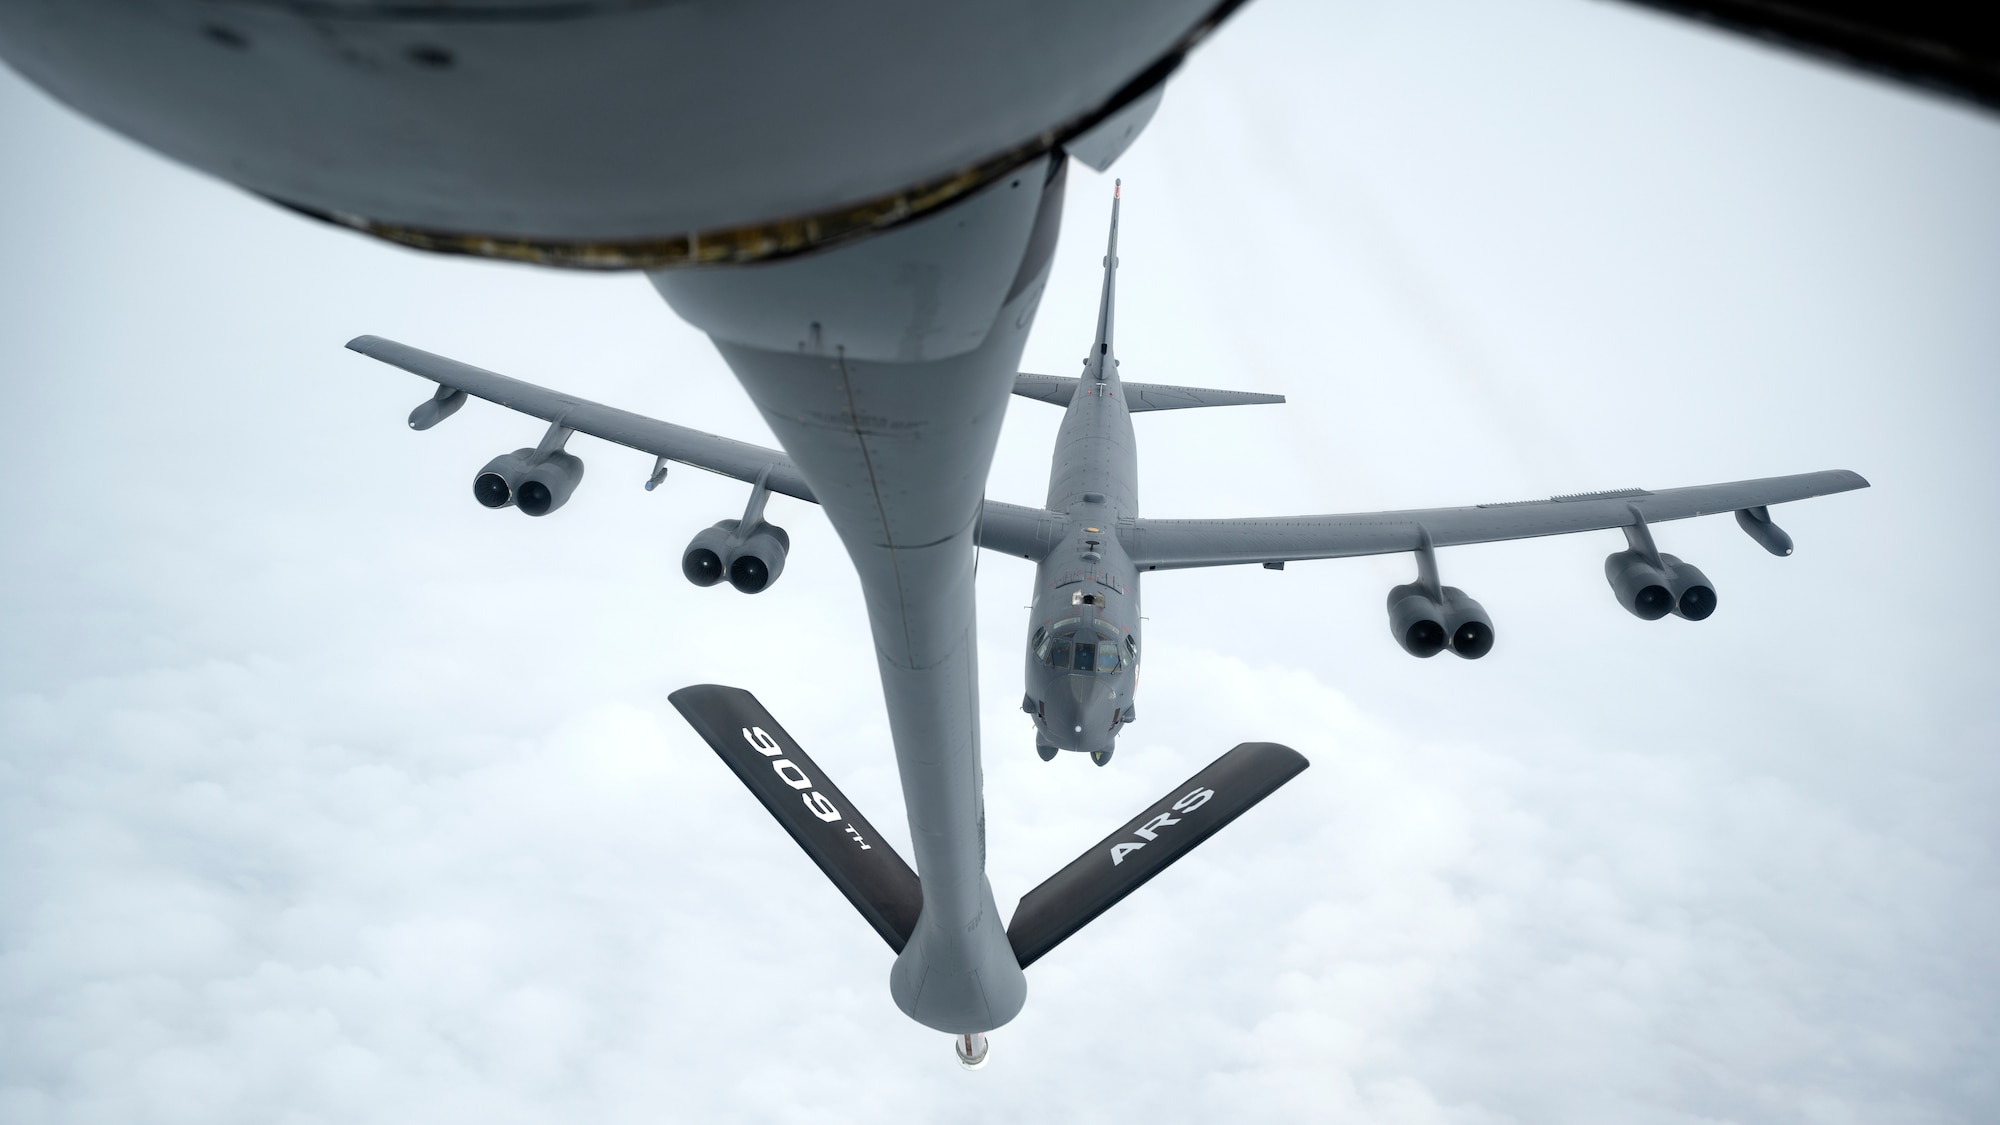 A U.S. Air Force 5th Bomb Wing B-52H Stratofortress approaches a 909th Air Refueling Squadron KC-135 Stratotanker for aerial refueling over the Pacific Ocean, Oct. 27, 2022. Aerial refueling capabilities extend airborne training time and combat radius, ensuring U.S. and Allied nation aircraft are postured to maintain regional peace and stability within the Indo-Pacific area of responsibility. (U.S. Air Force photo by Senior Airman Jessi Roth)